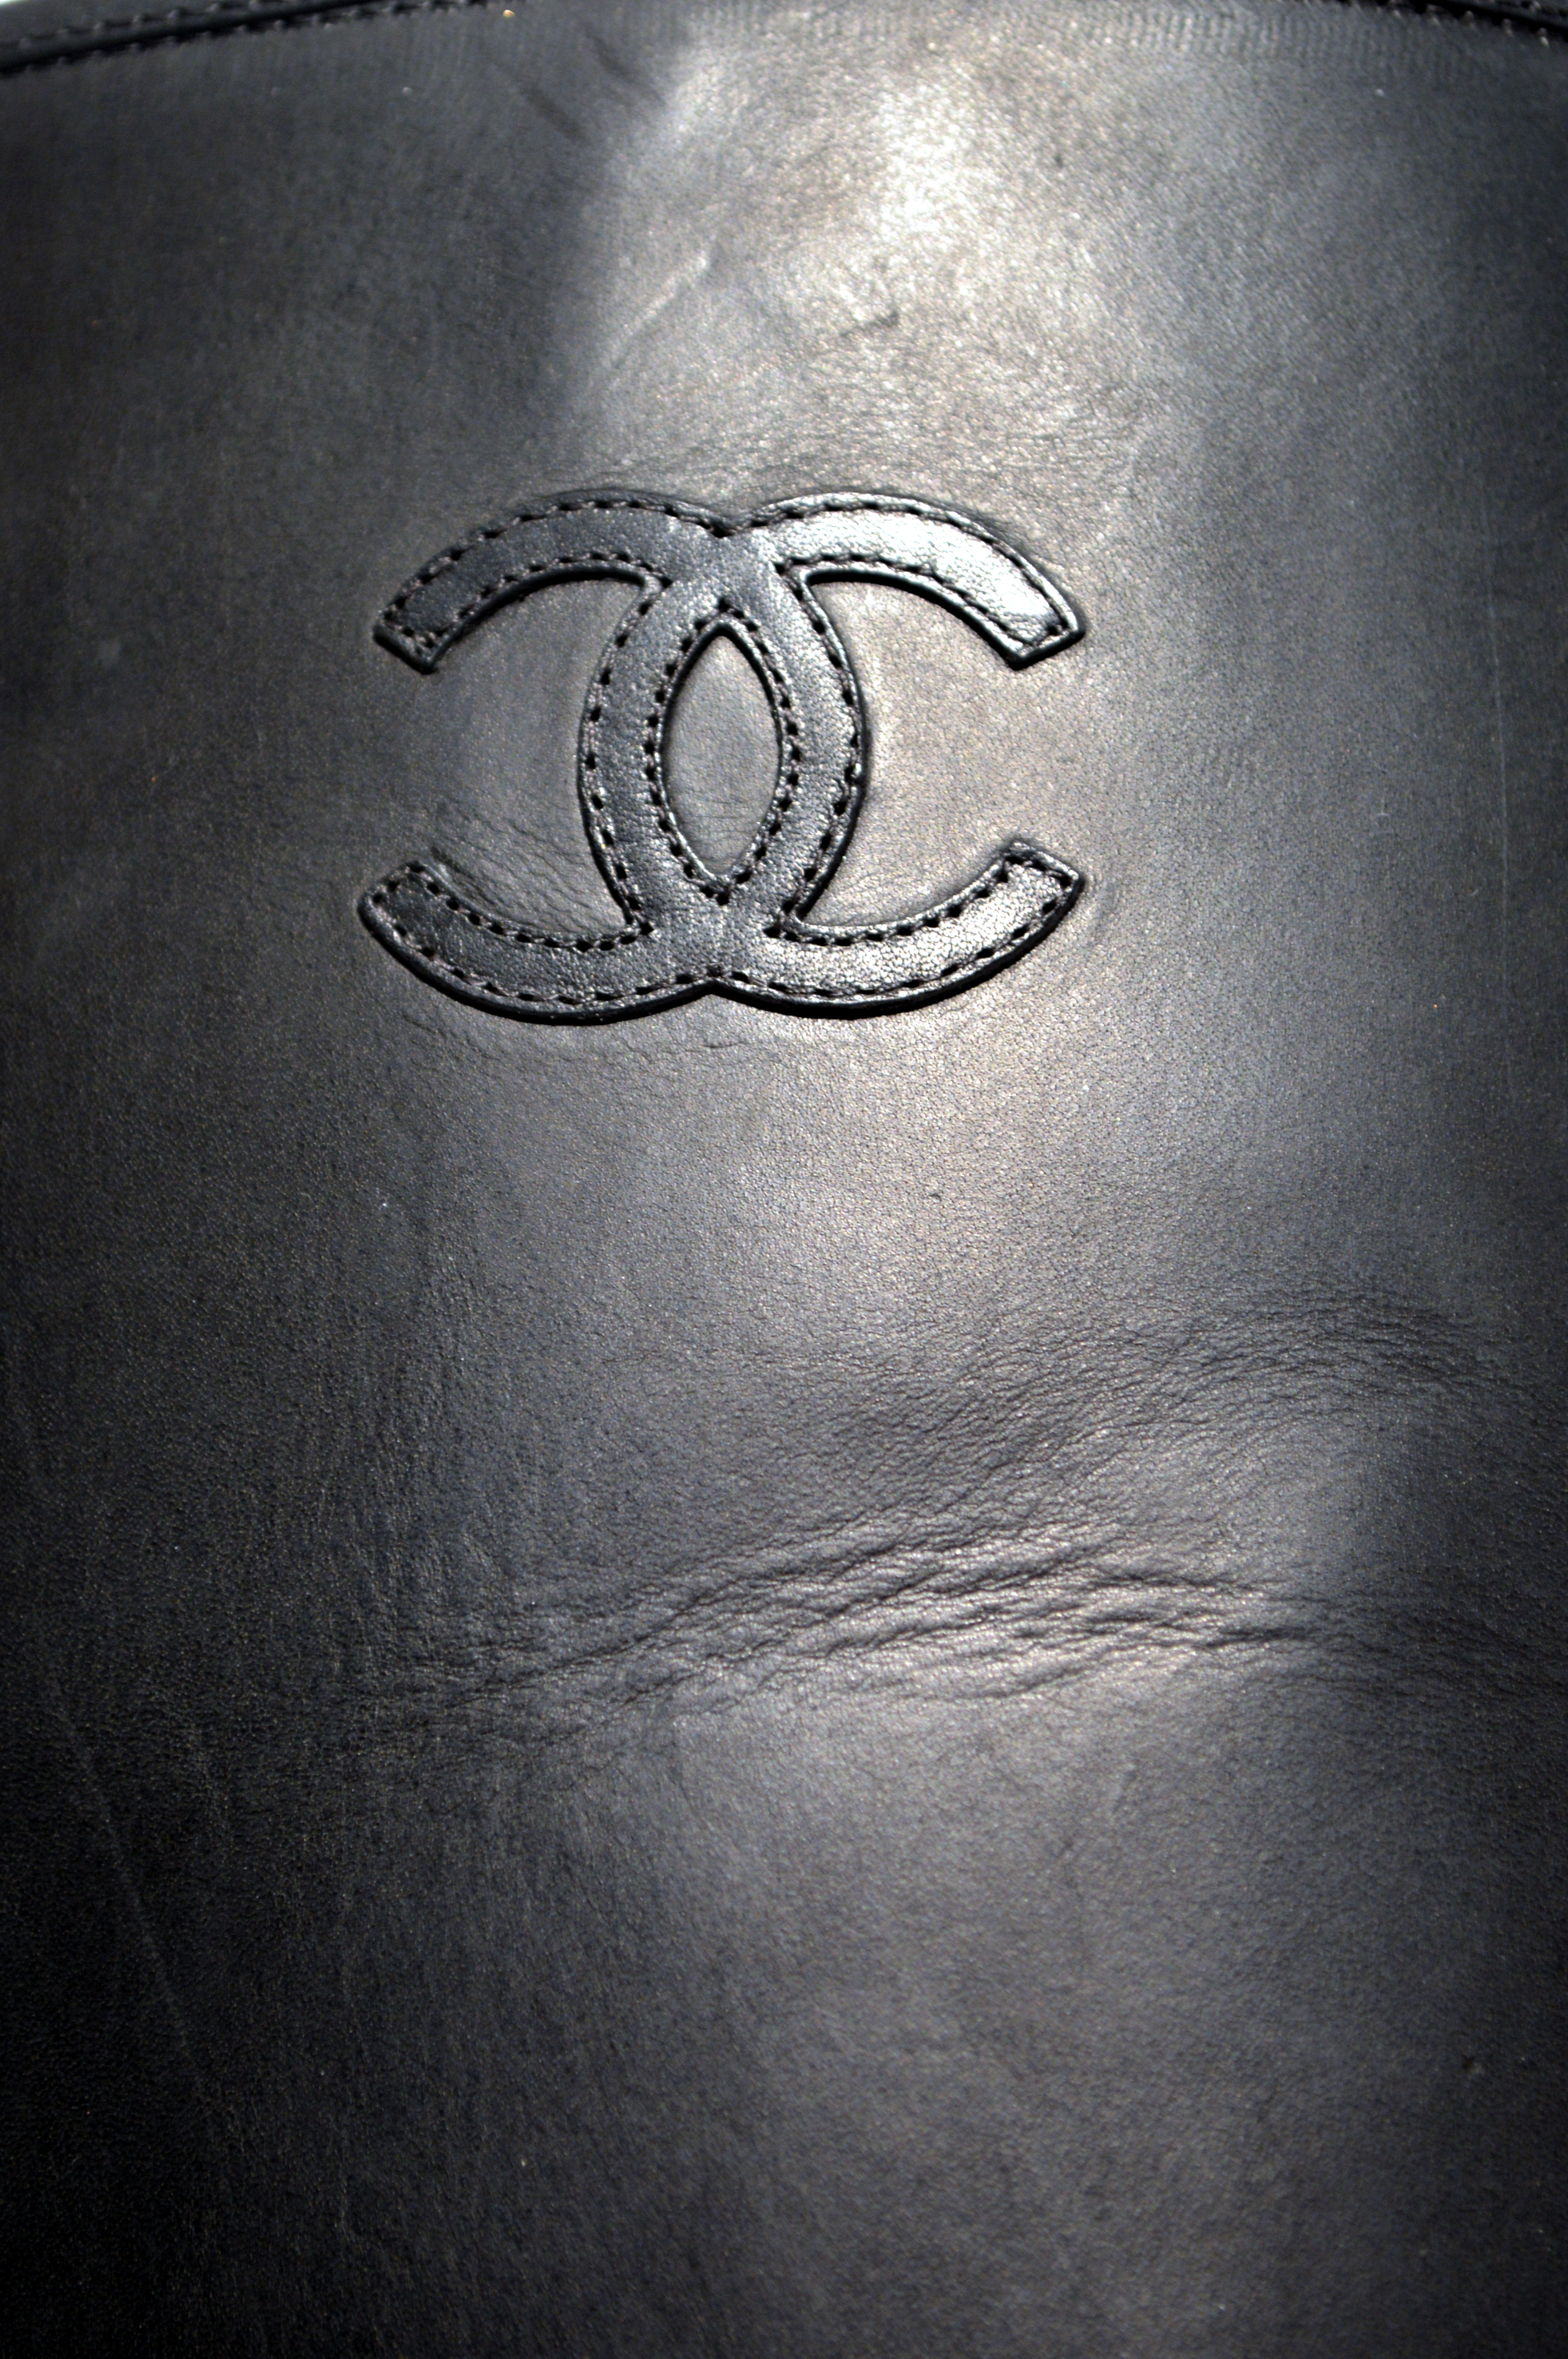 Bottes CHANEL taille